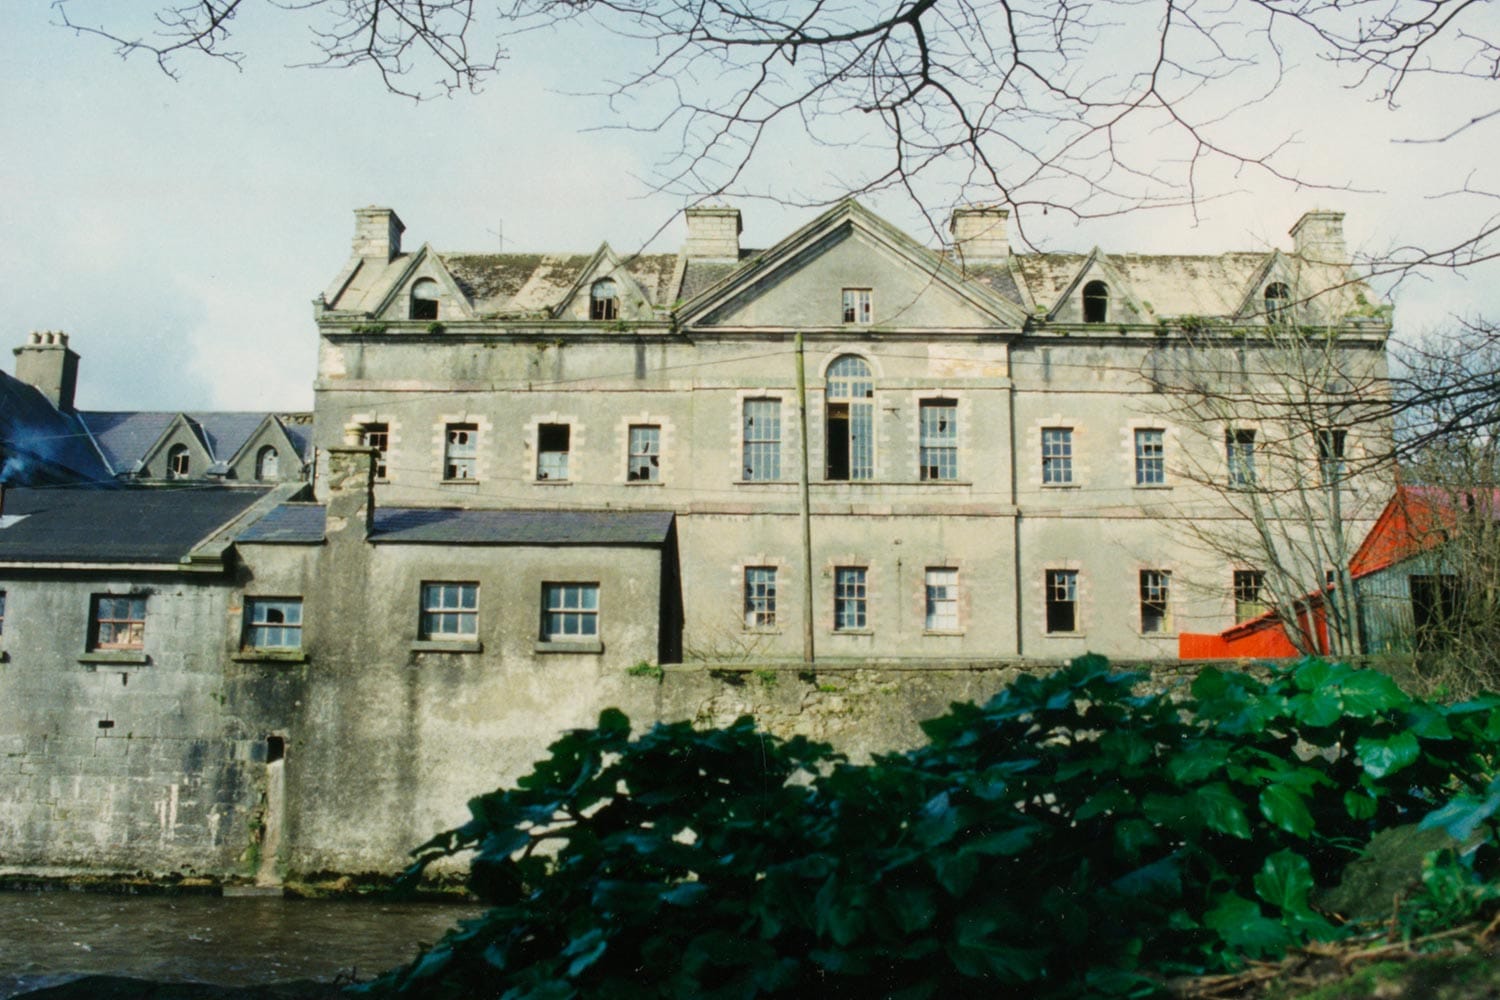 King House before the restoration